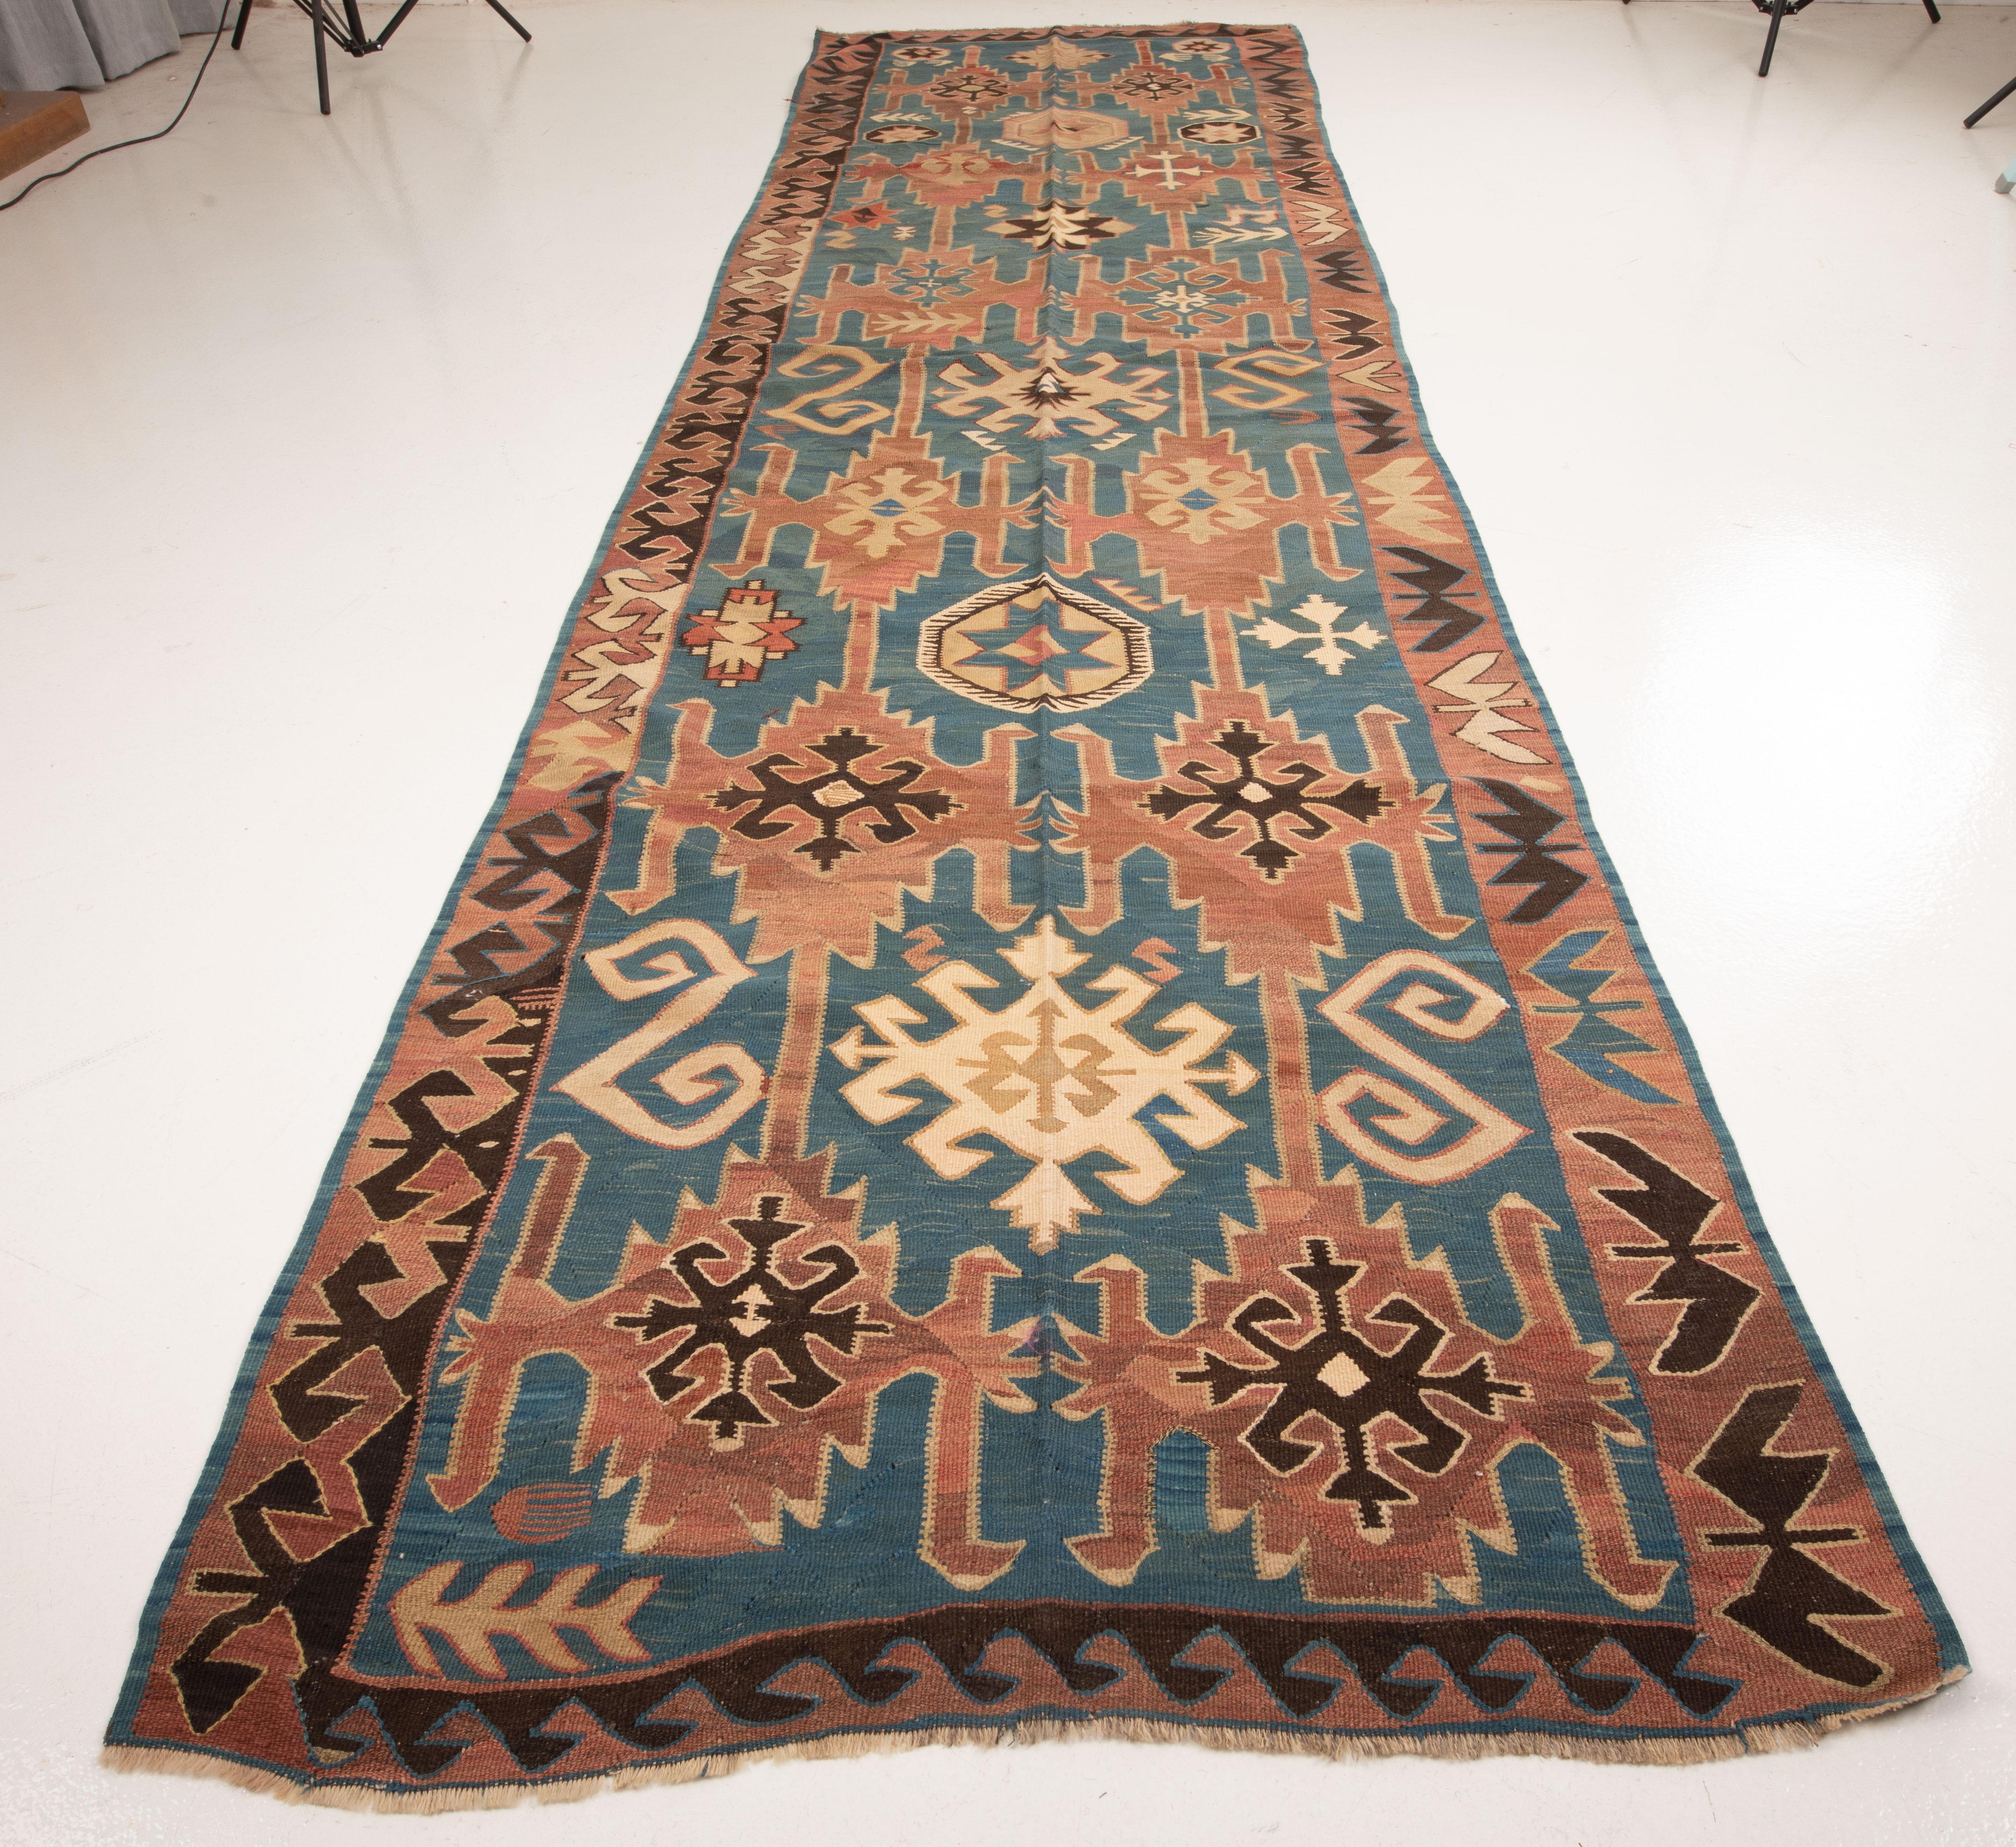 A wide runner kilim with soft blues from Afar peoples of Daghestan in Caucasus.